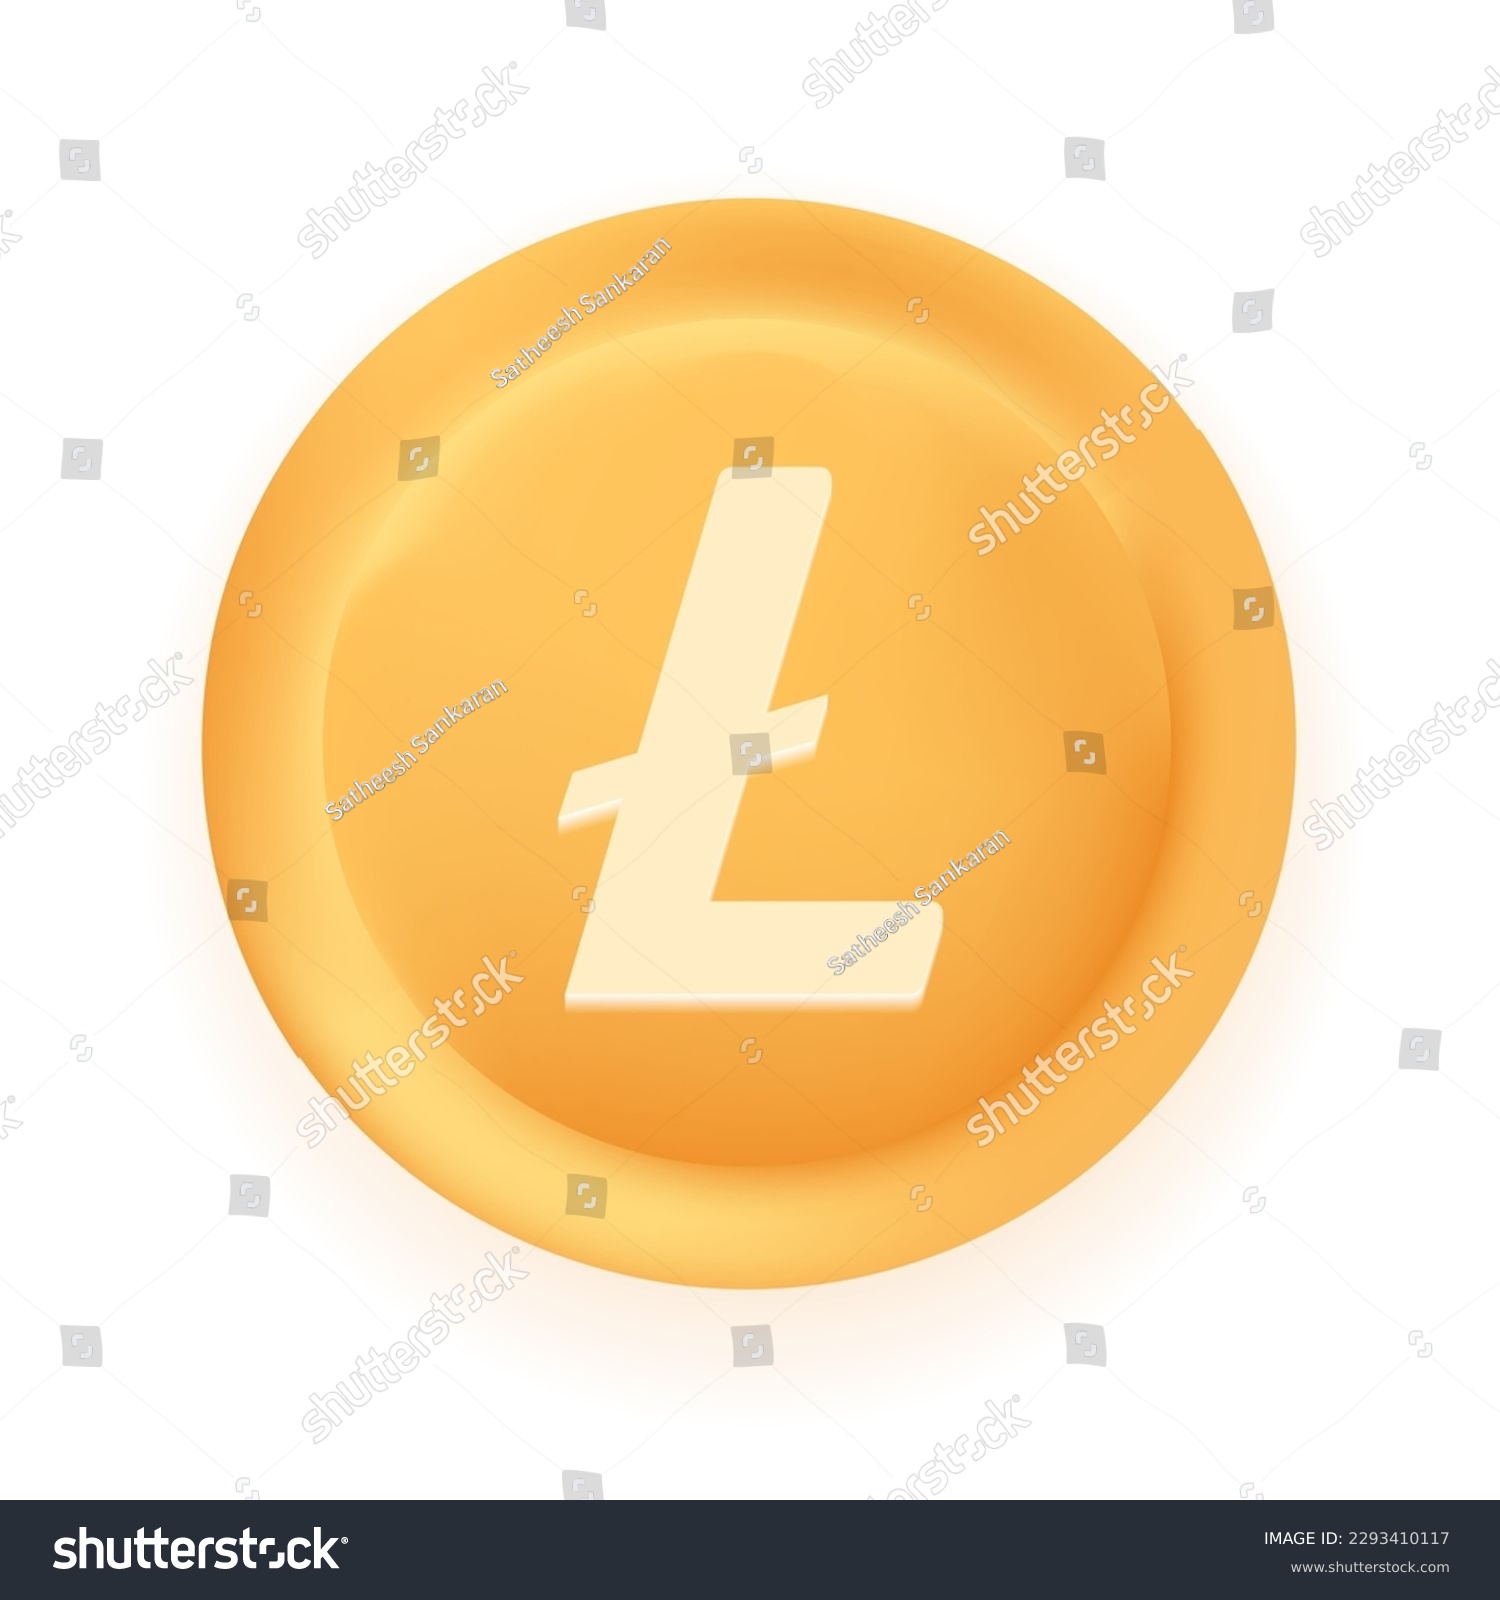 SVG of Litecoin (LTC) crypto currency 3D coin vector illustration isolated on white background. Can be used as virtual money icon, logo, emblem, sticker and badge designs. svg